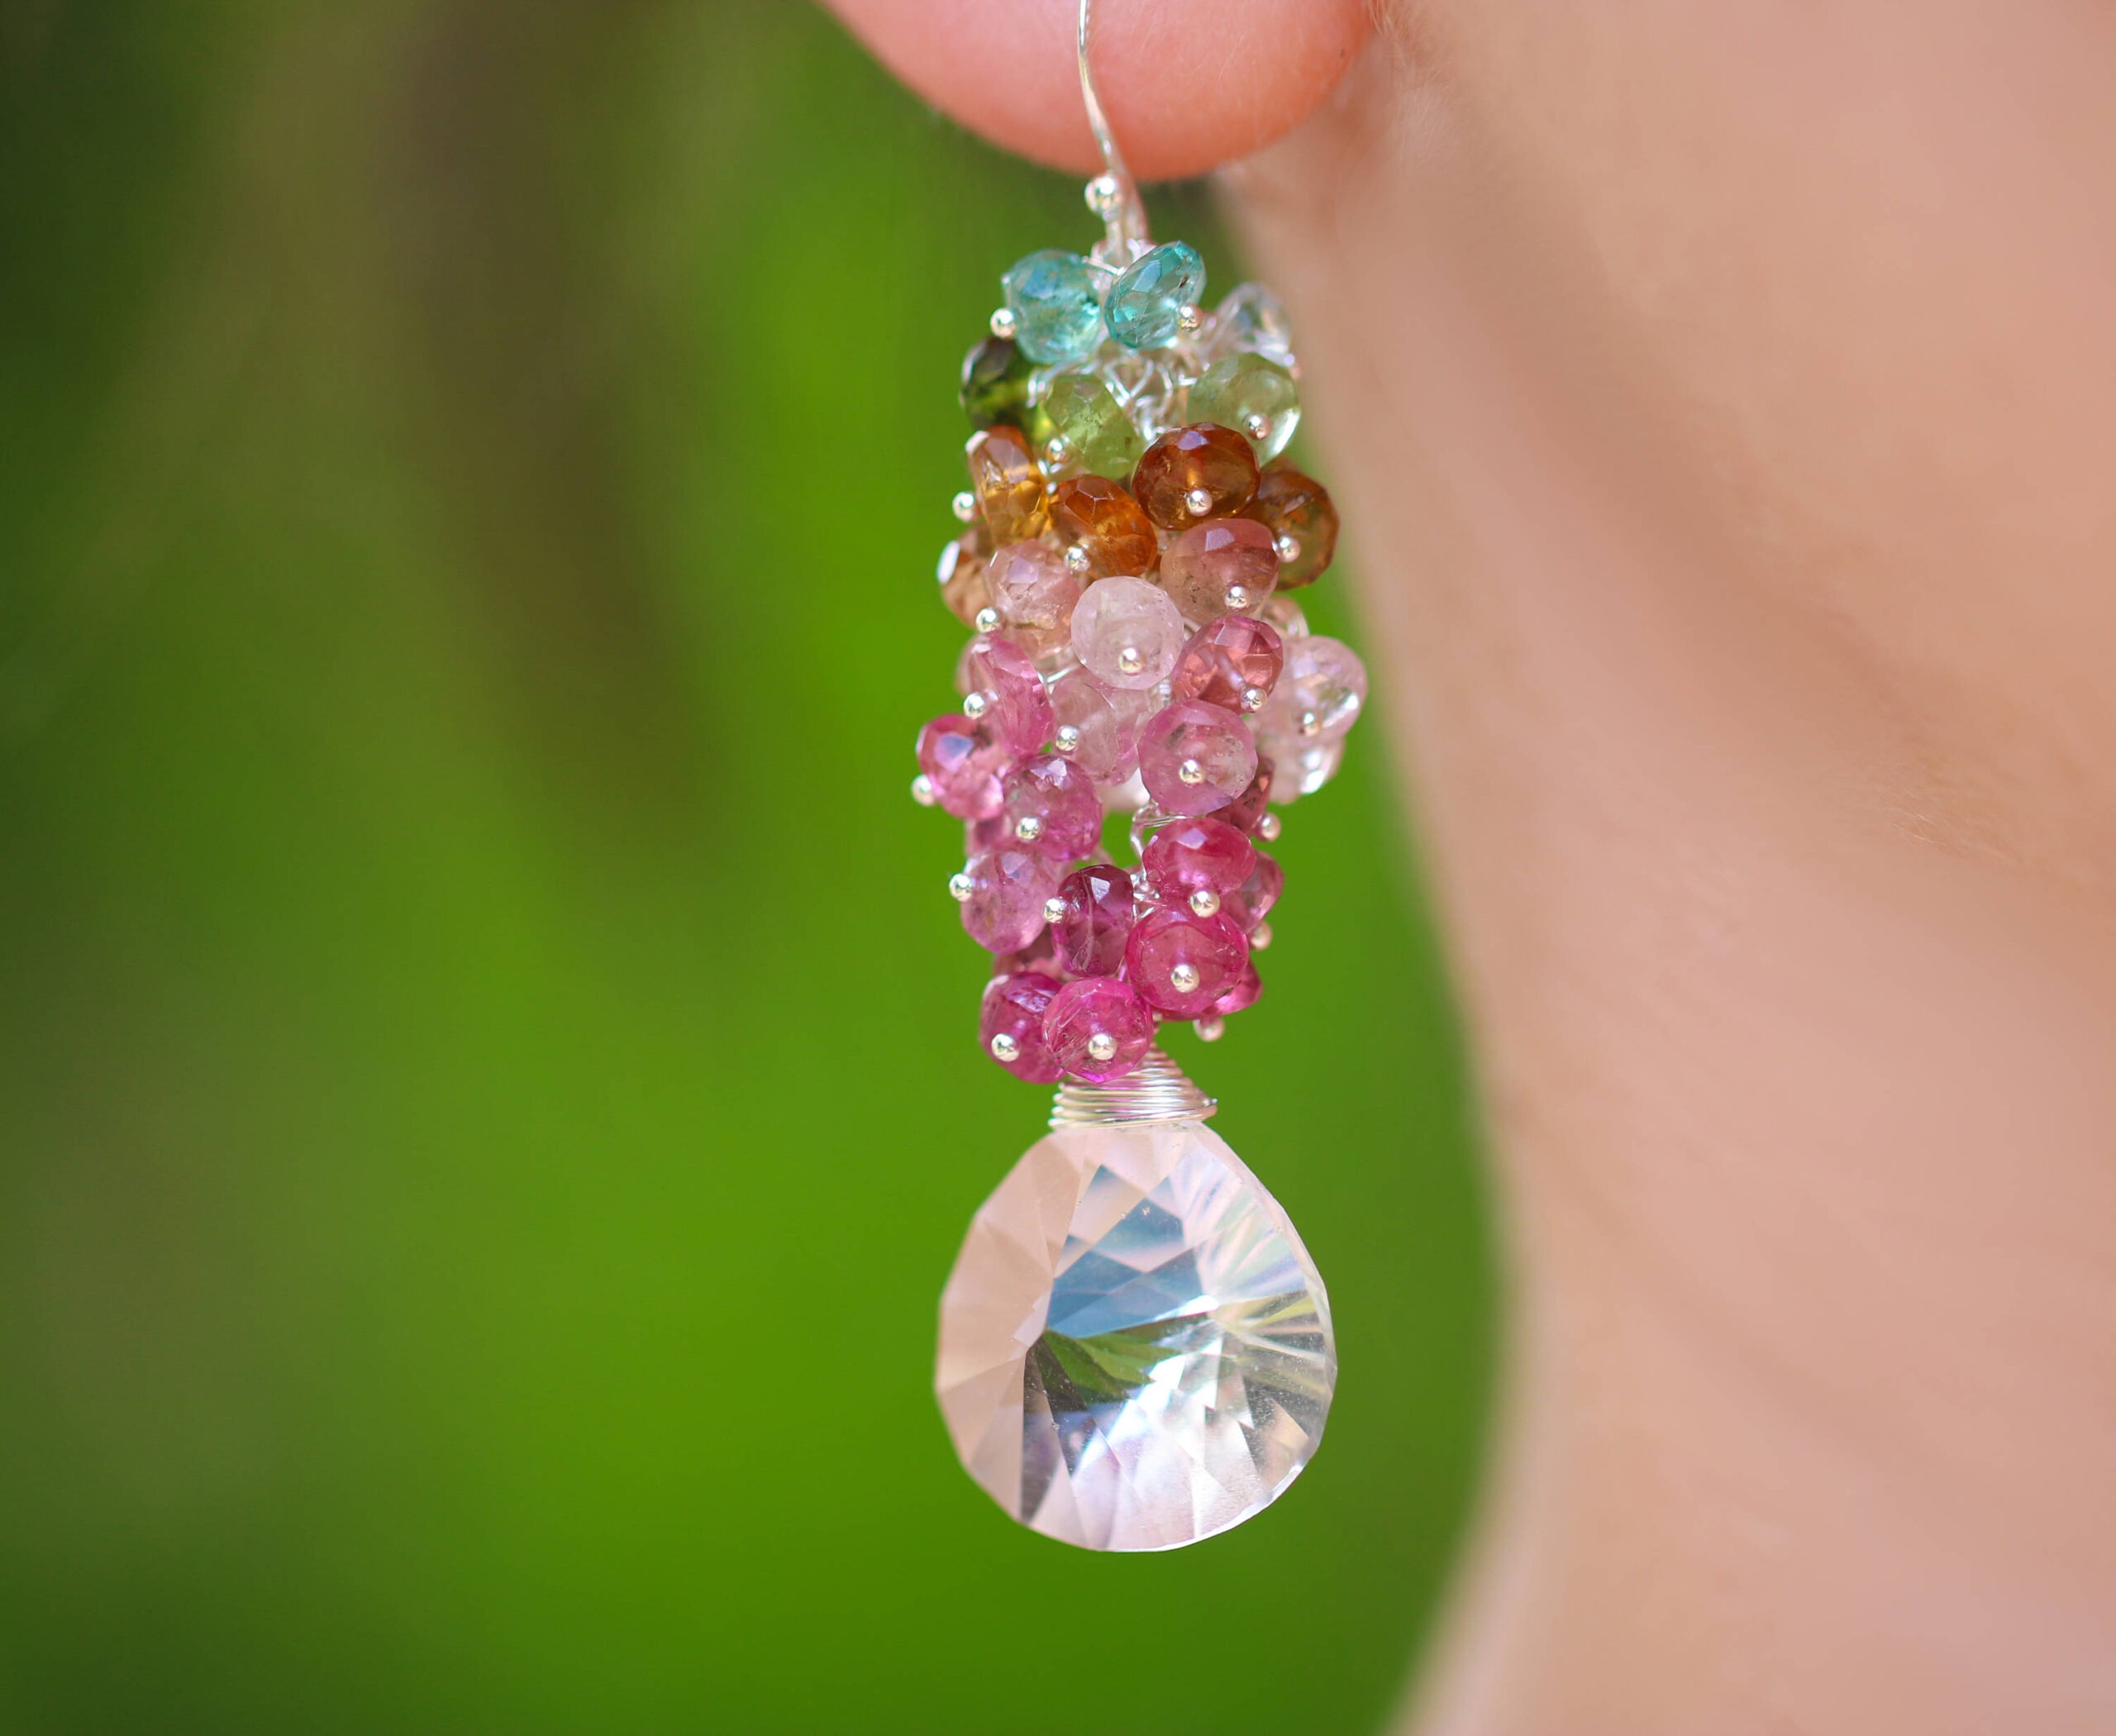 Colorful Tourmaline Cluster Earrings with Rock Crystal Quartz, Gemstone Silver Statement Earrings